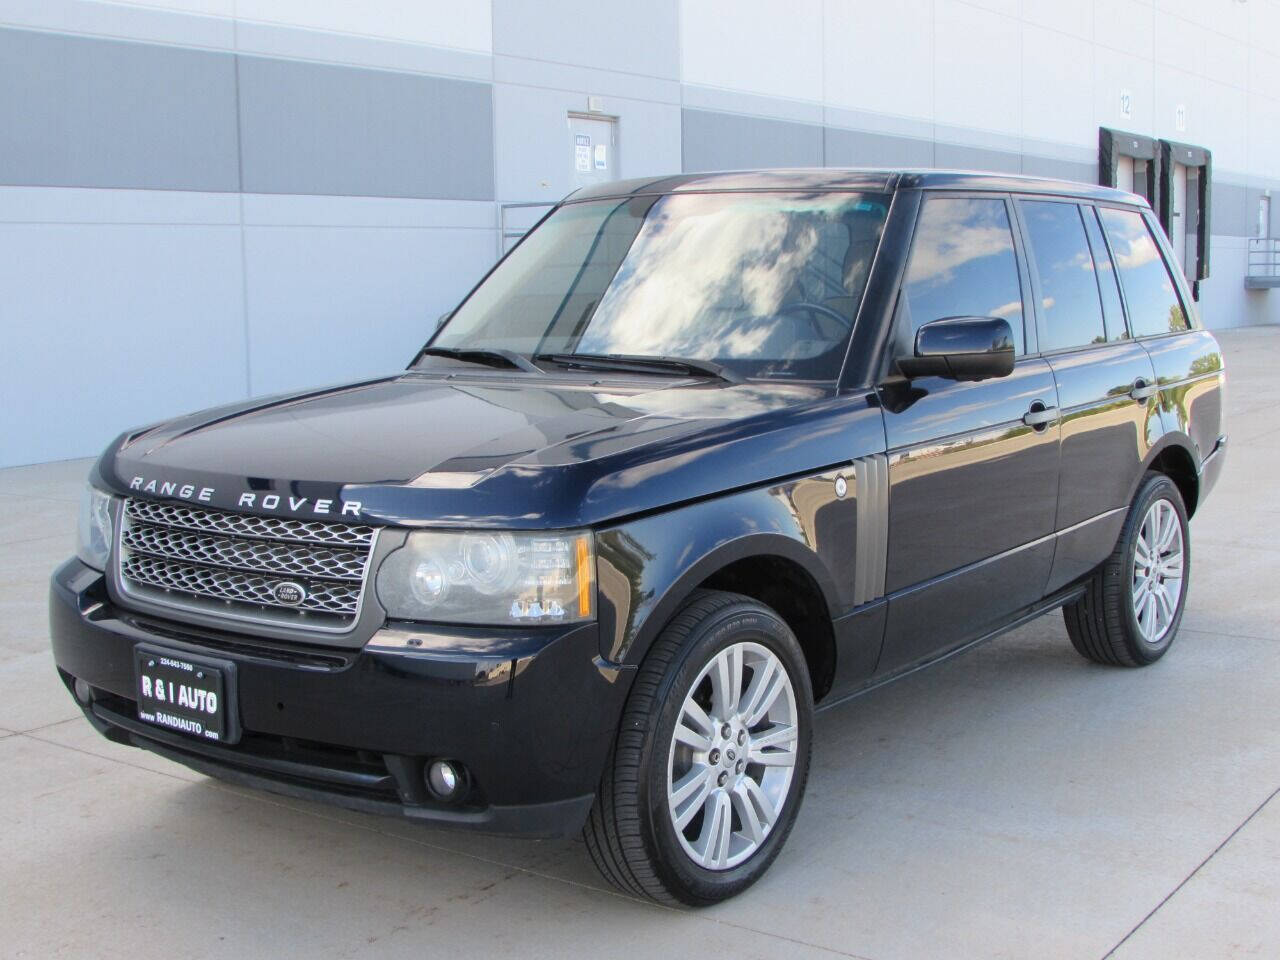 2010 Rover Range Rover For Sale - Carsforsale.com®